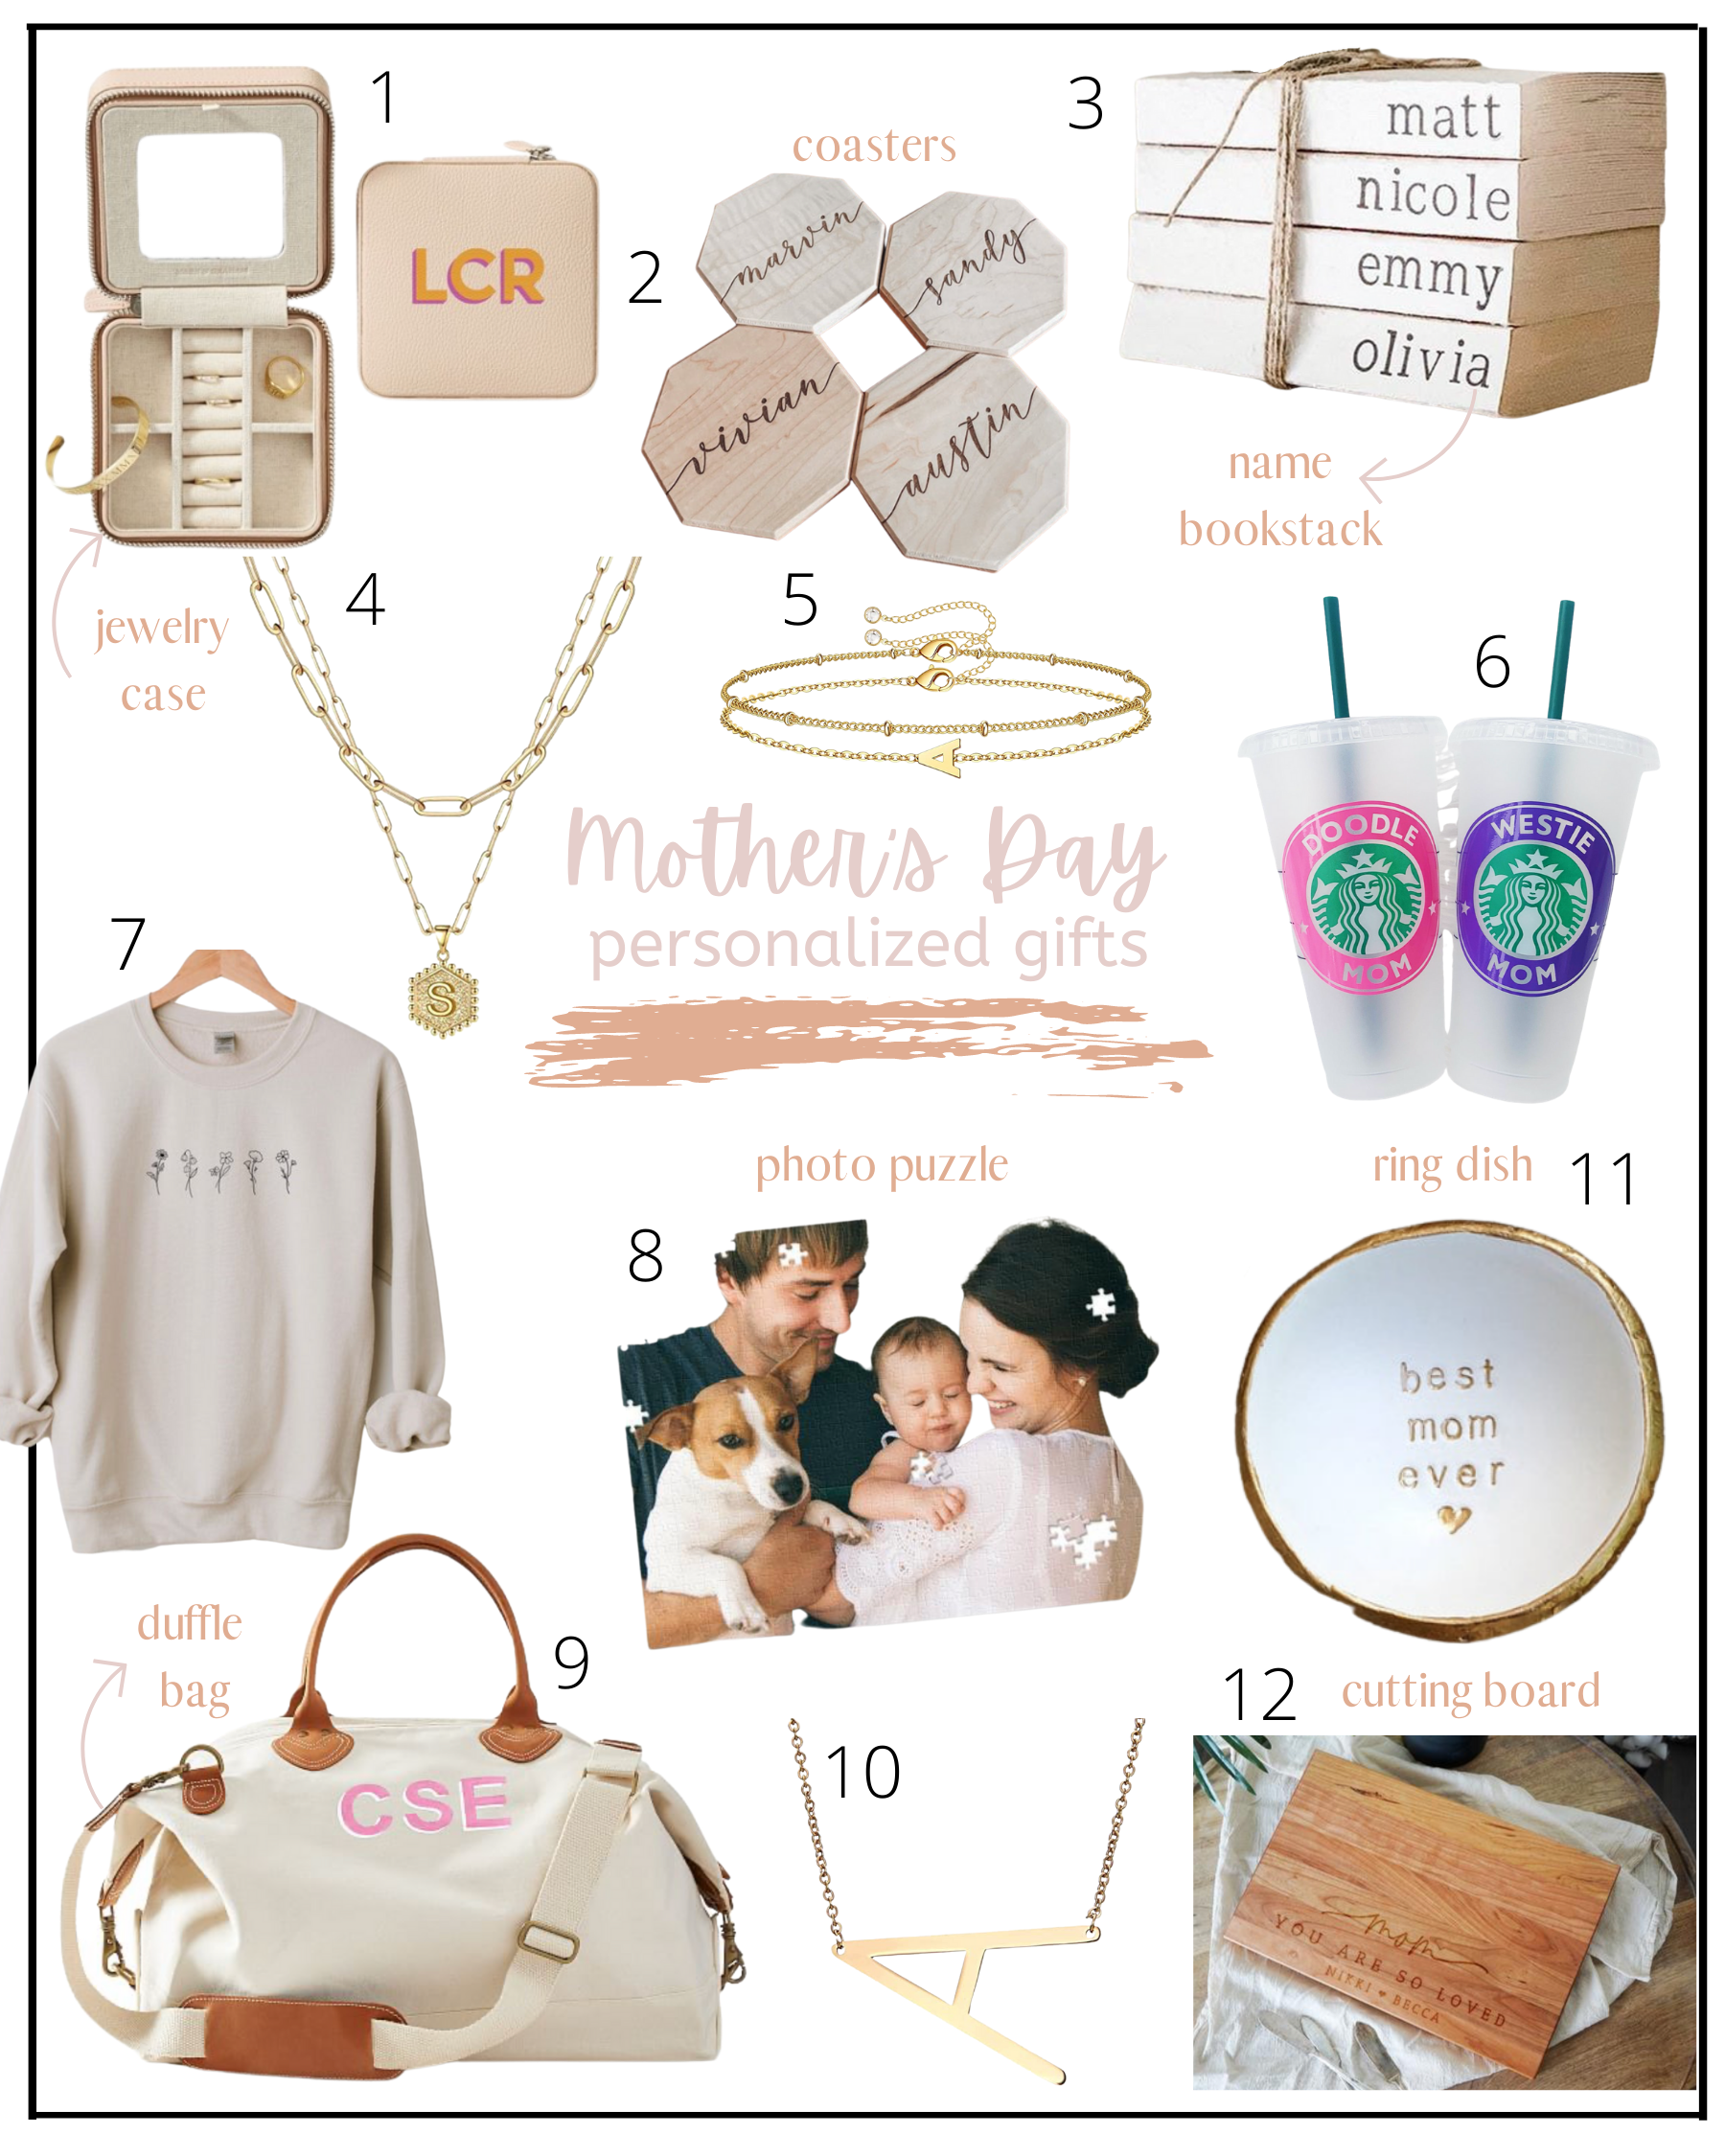 A guide to 5 bags for 5 different moms on this Mother's Day